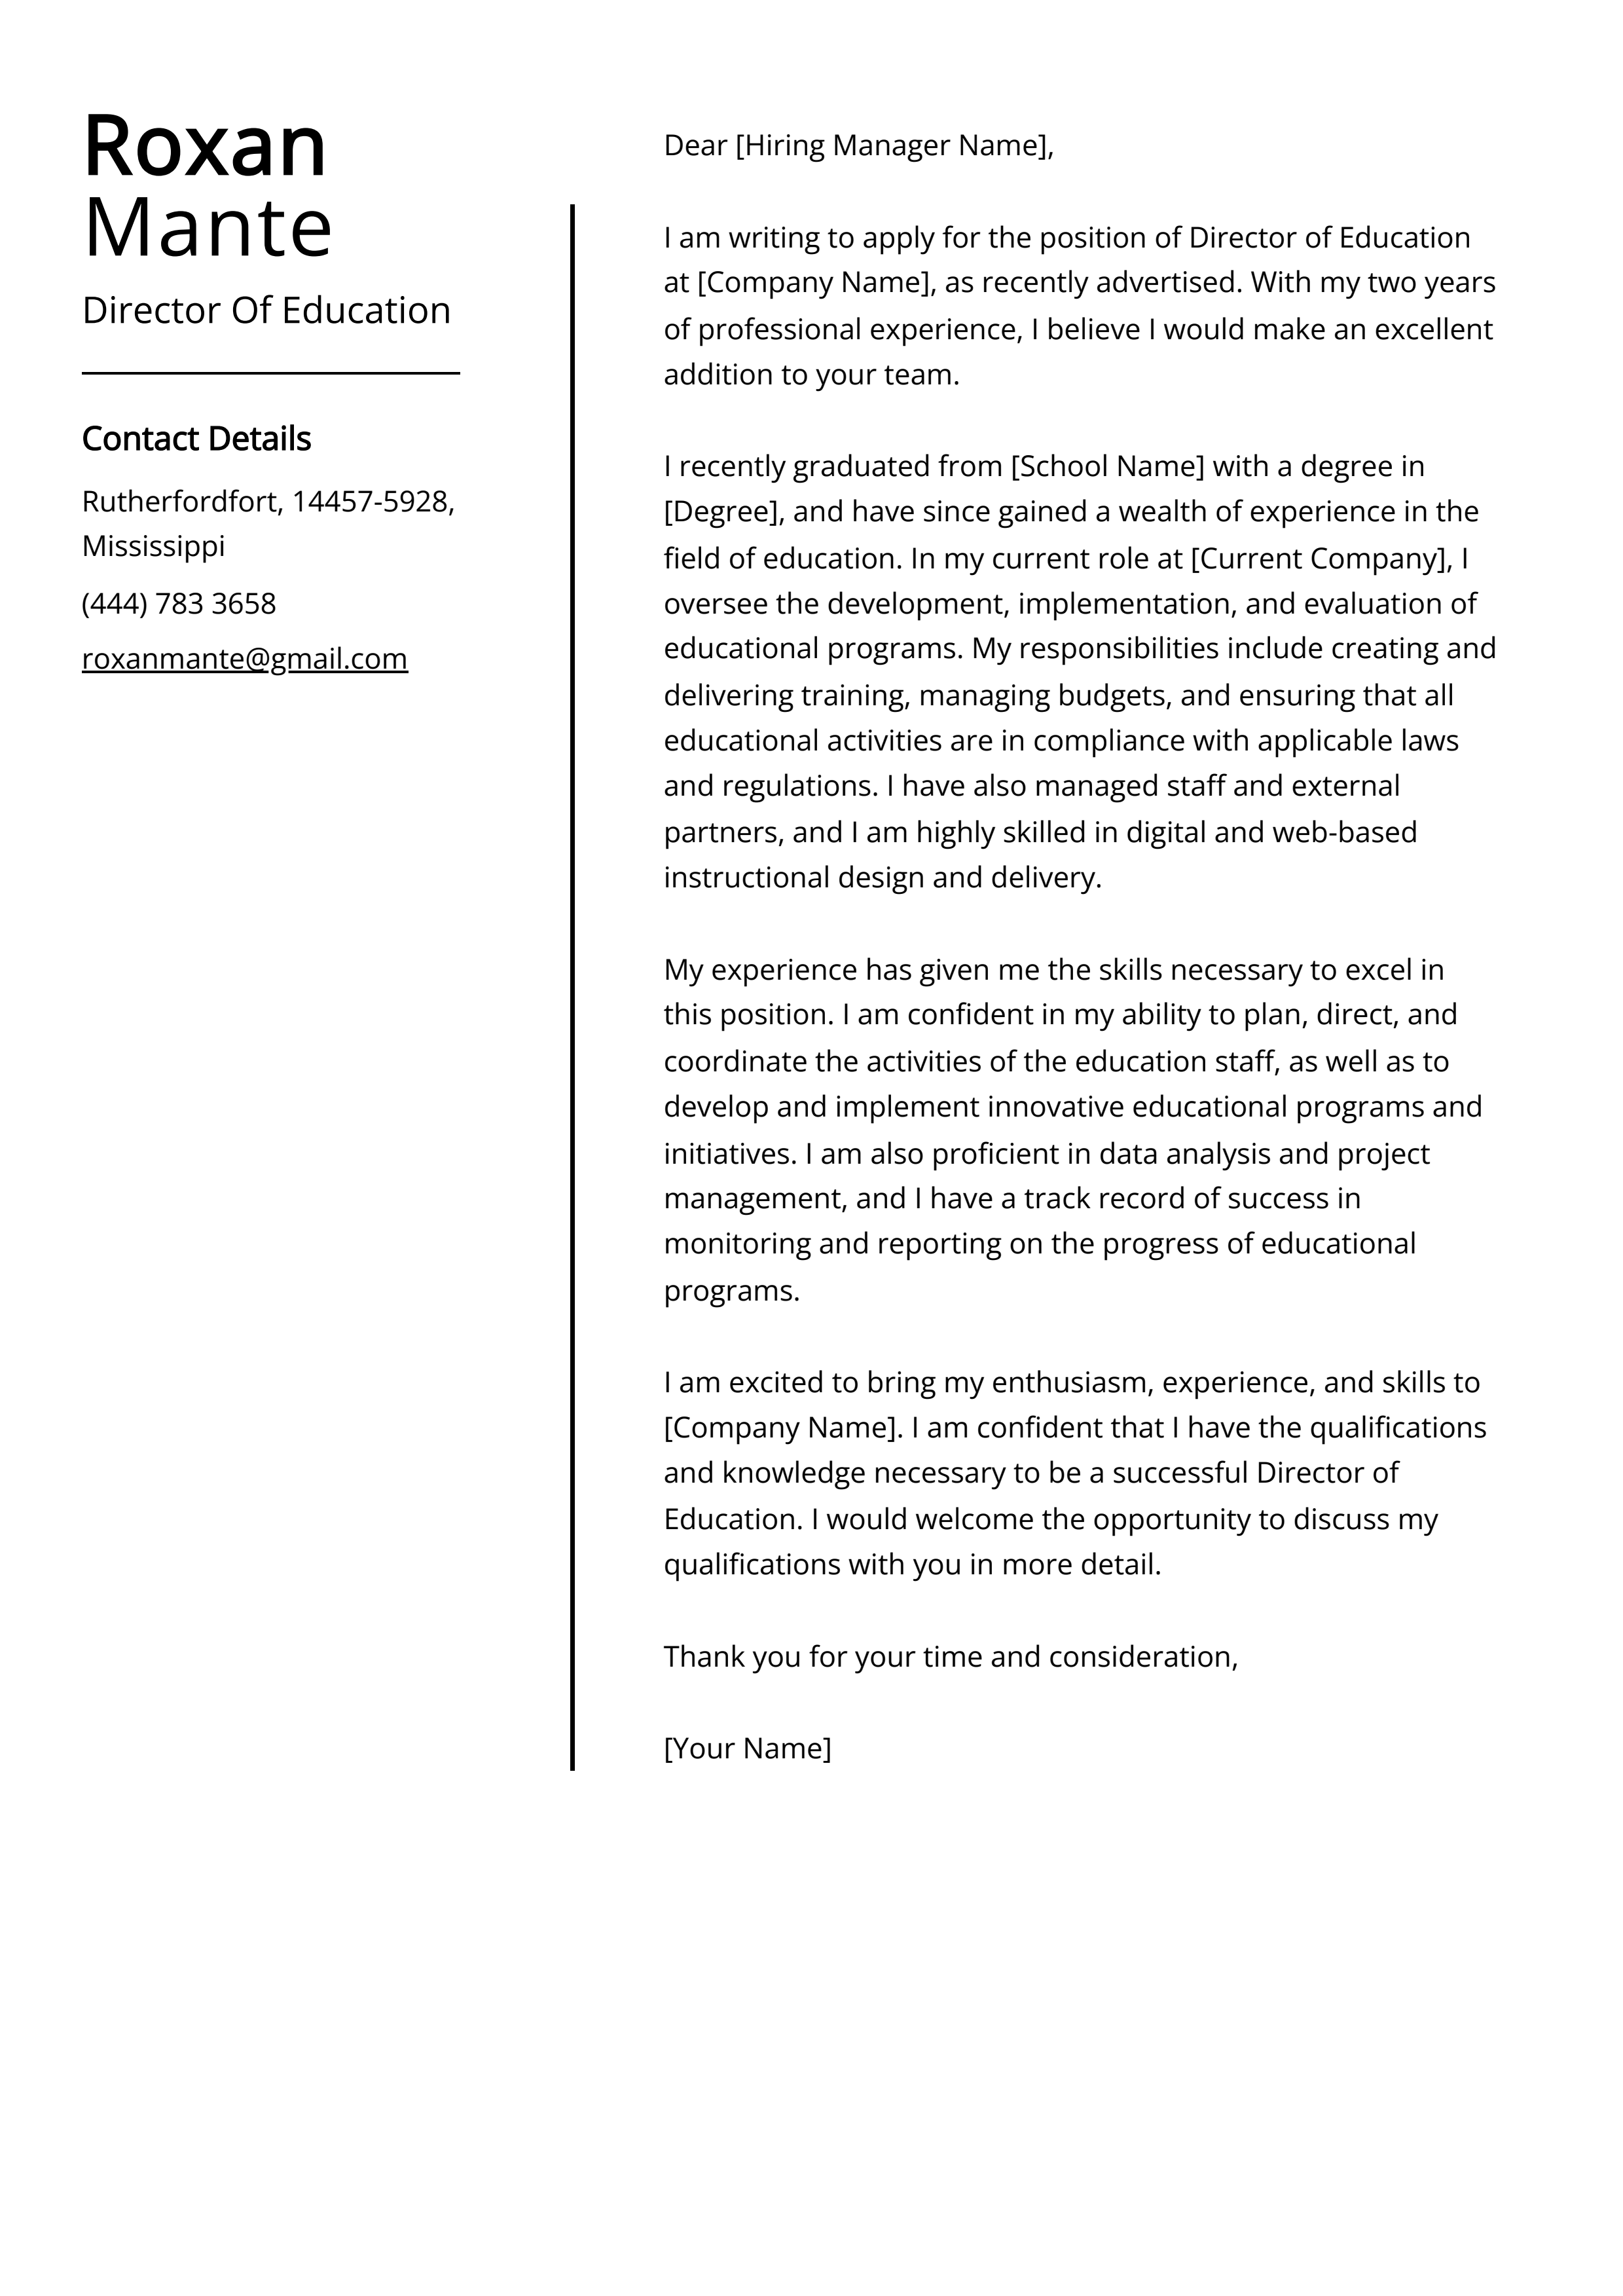 Director Of Education Cover Letter Example